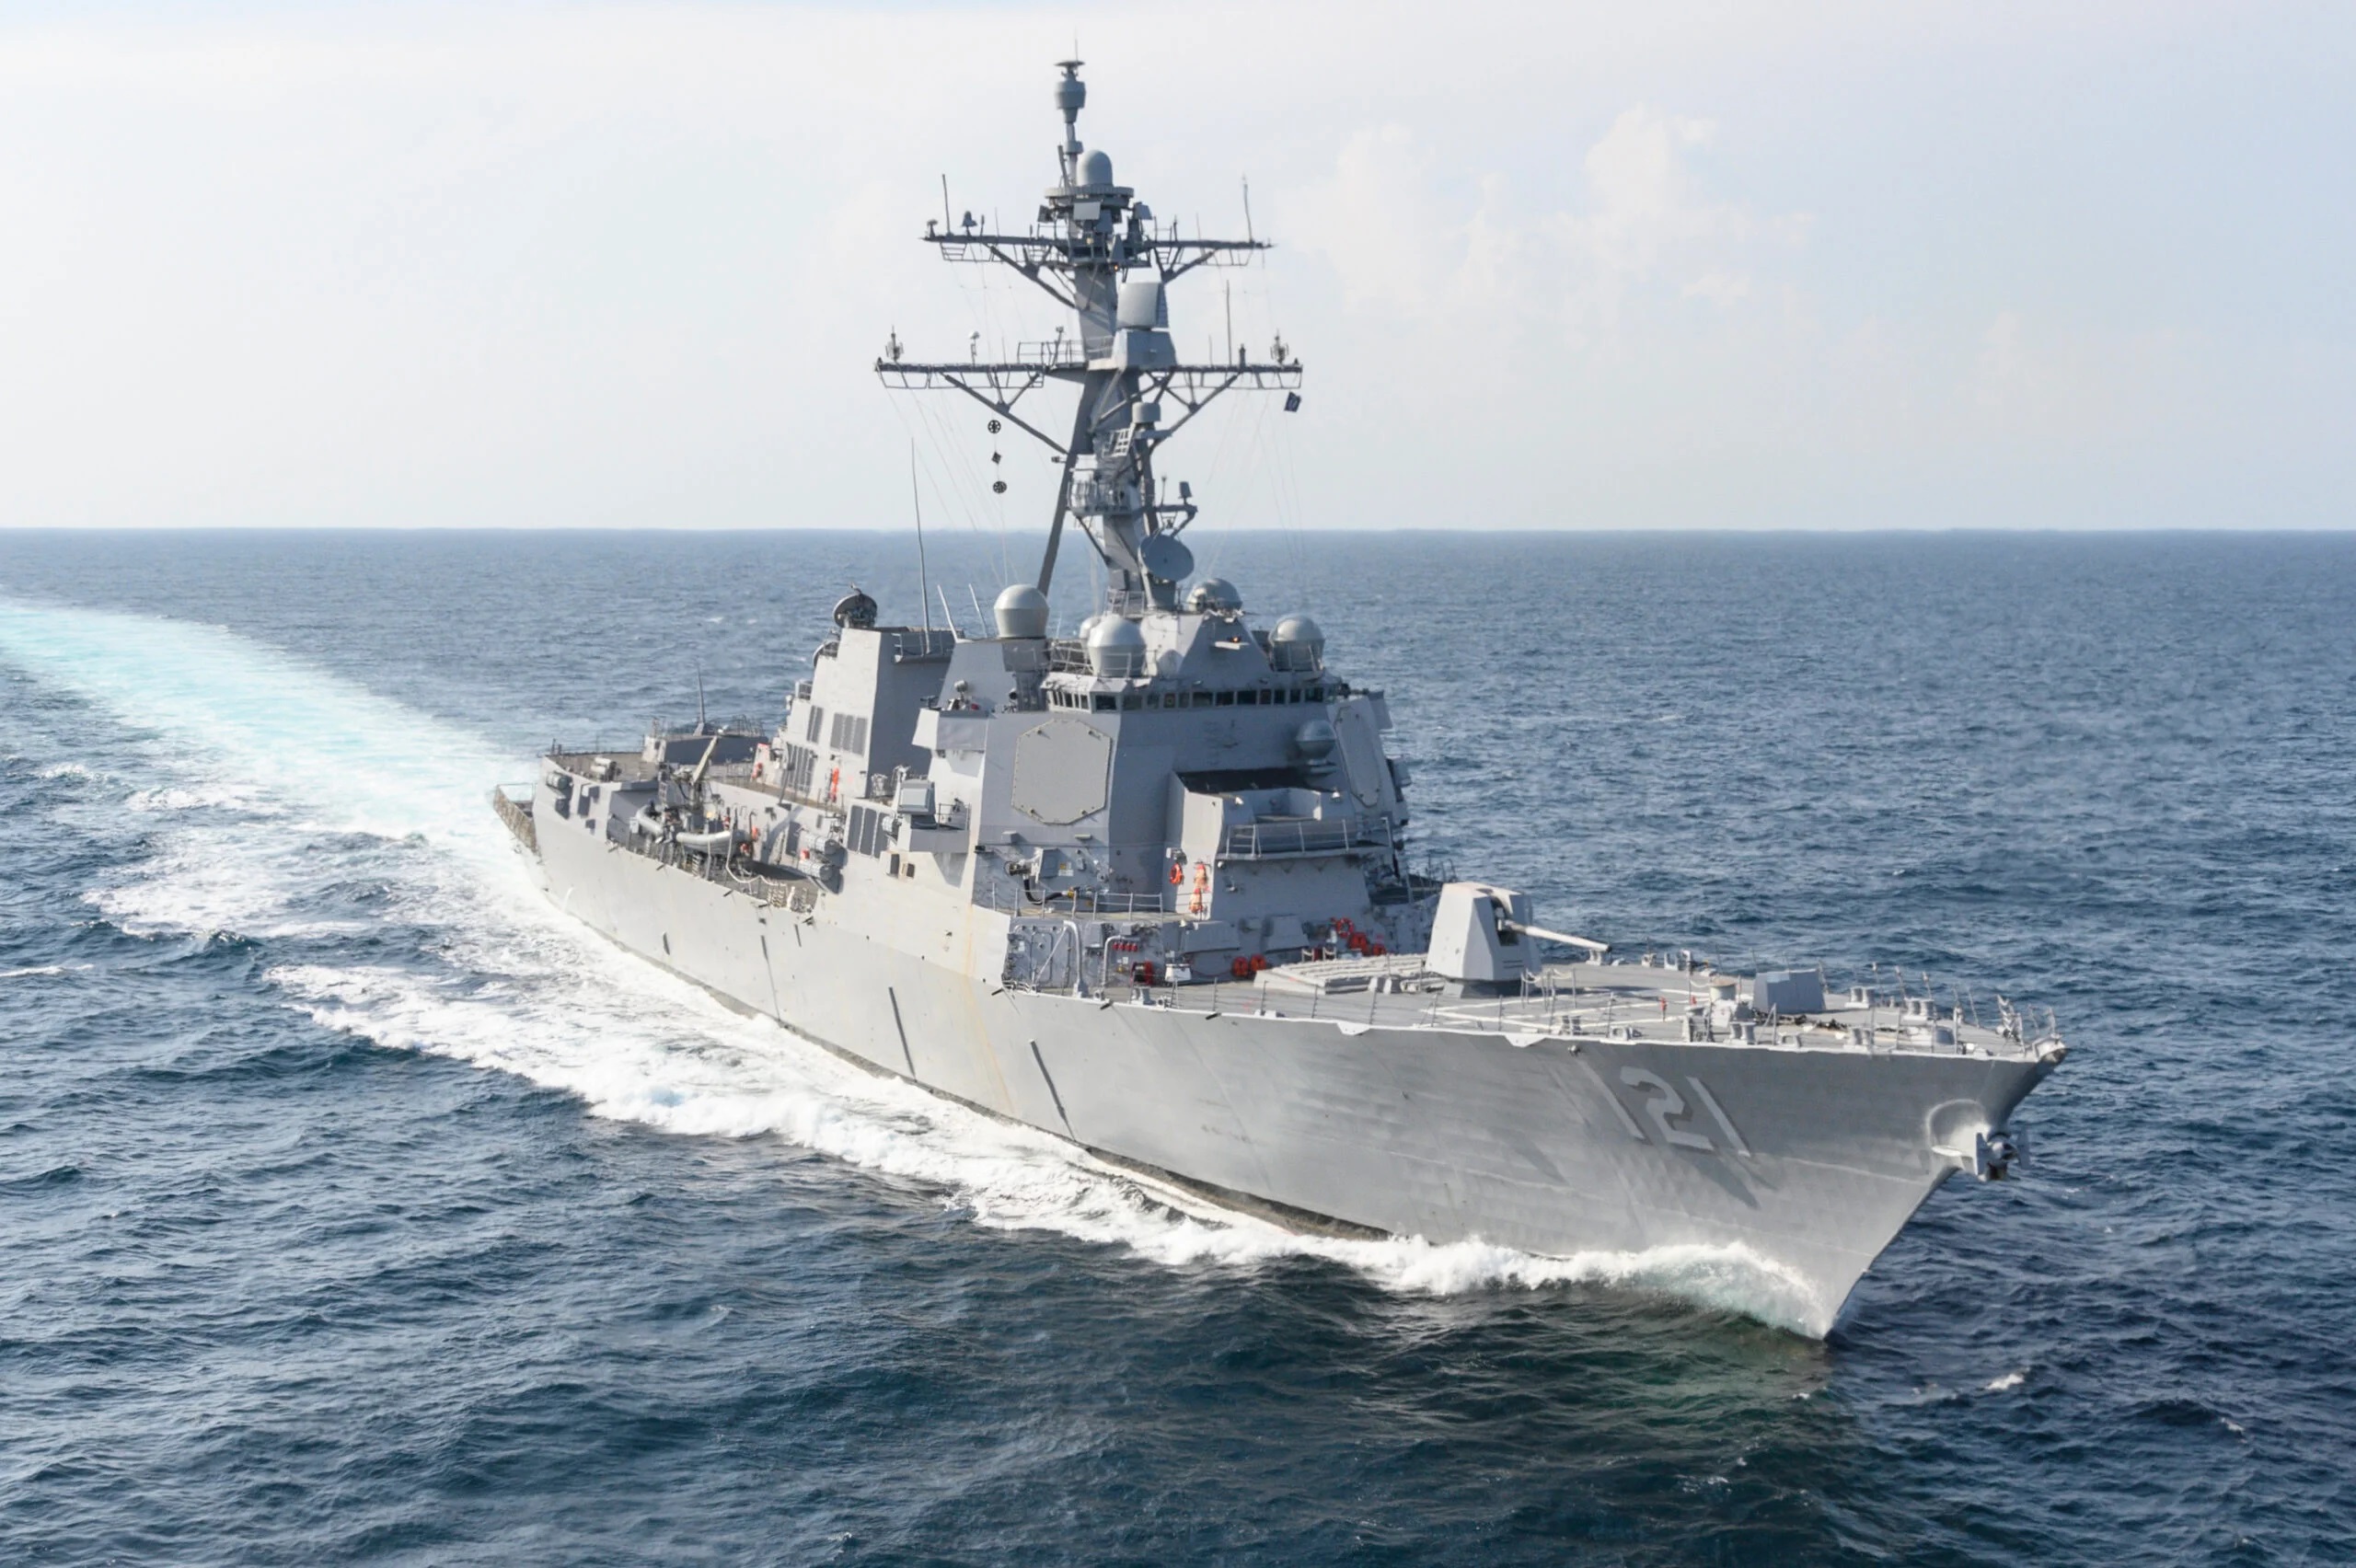 Arleigh Burke-class guided-missile destroyer